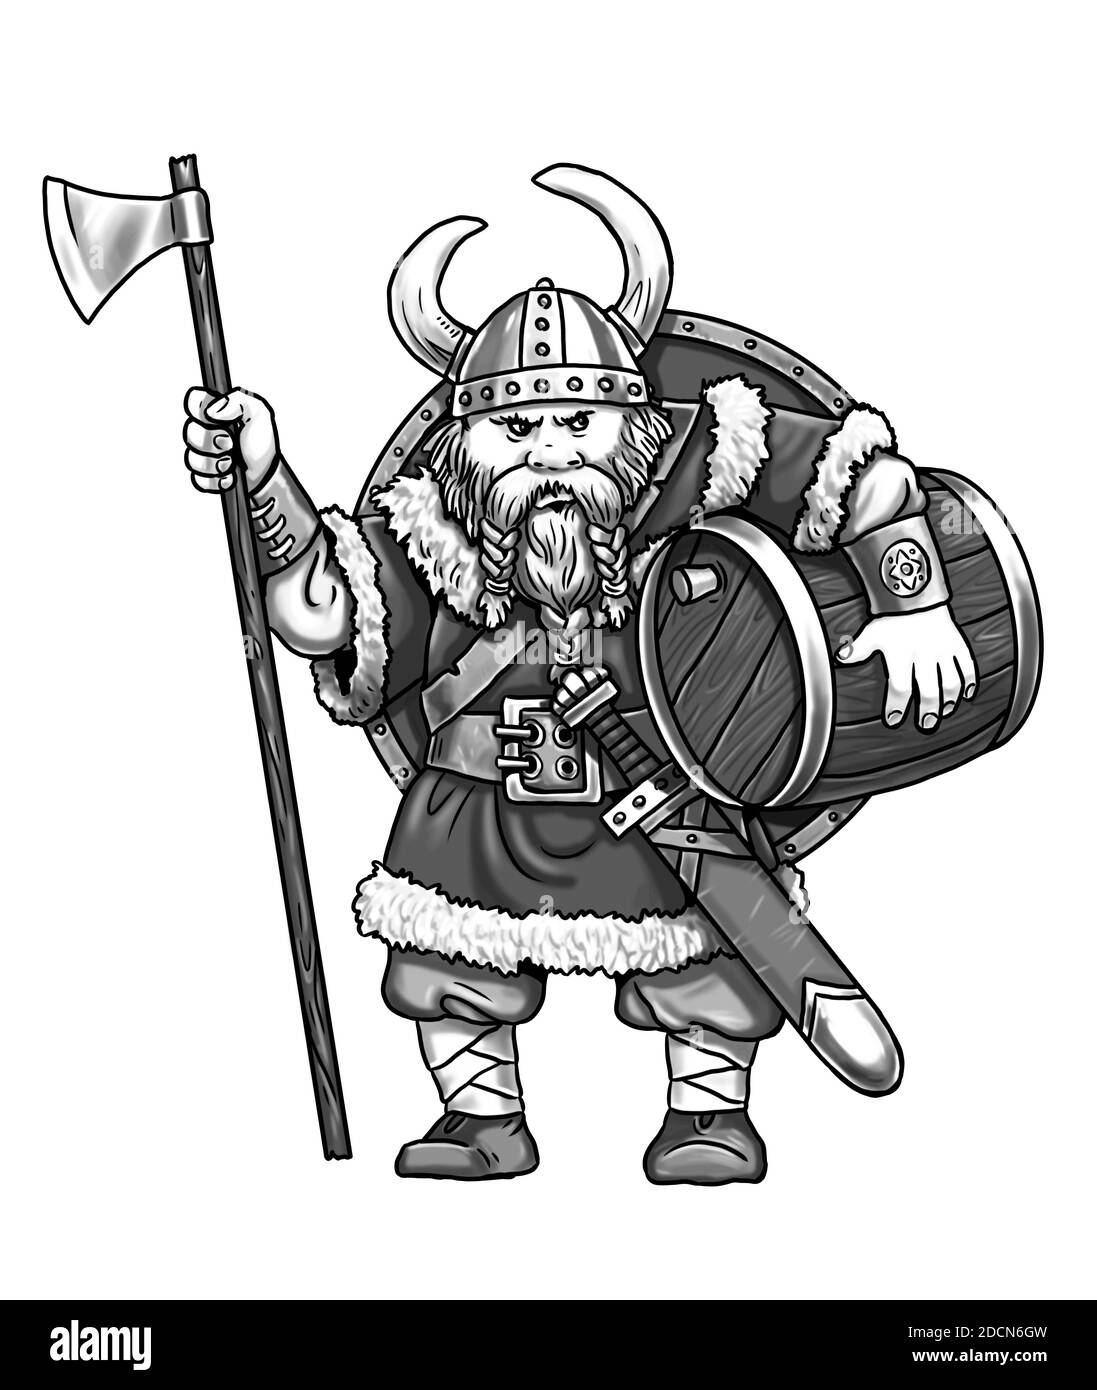 Viking with ax. Medieval robber. Black white comic drawing. Stock Photo